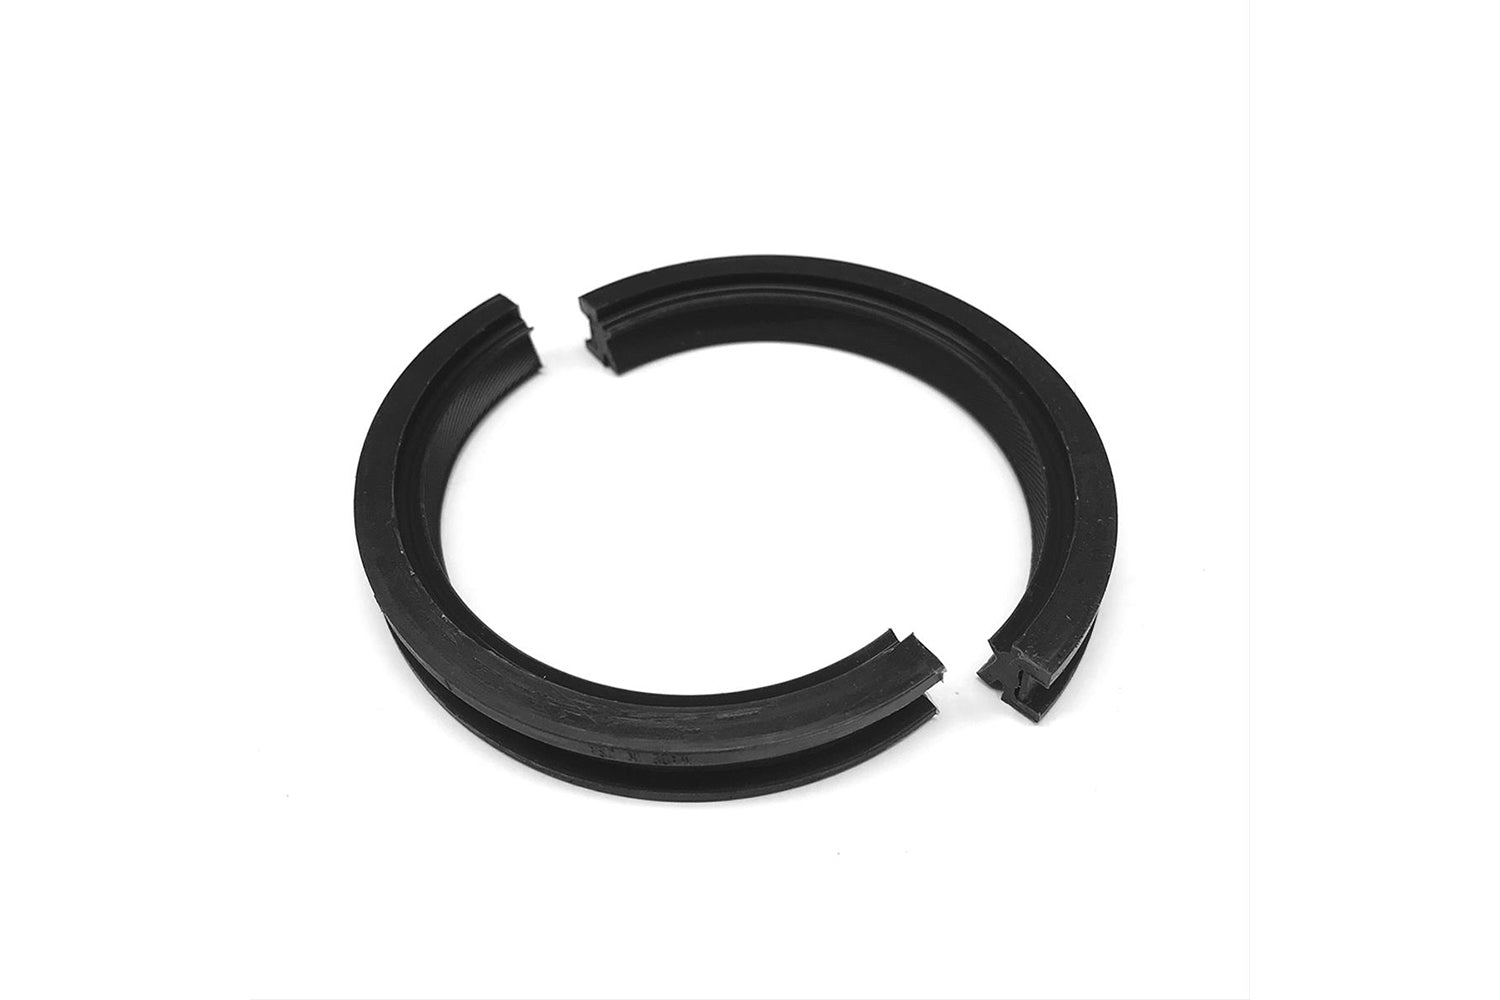 SCE Gaskets Accu-Seal E Rear Main Seal 1970-80 Chevy 400 Align-Honed 2.841" Diameter 2-pc - 11104